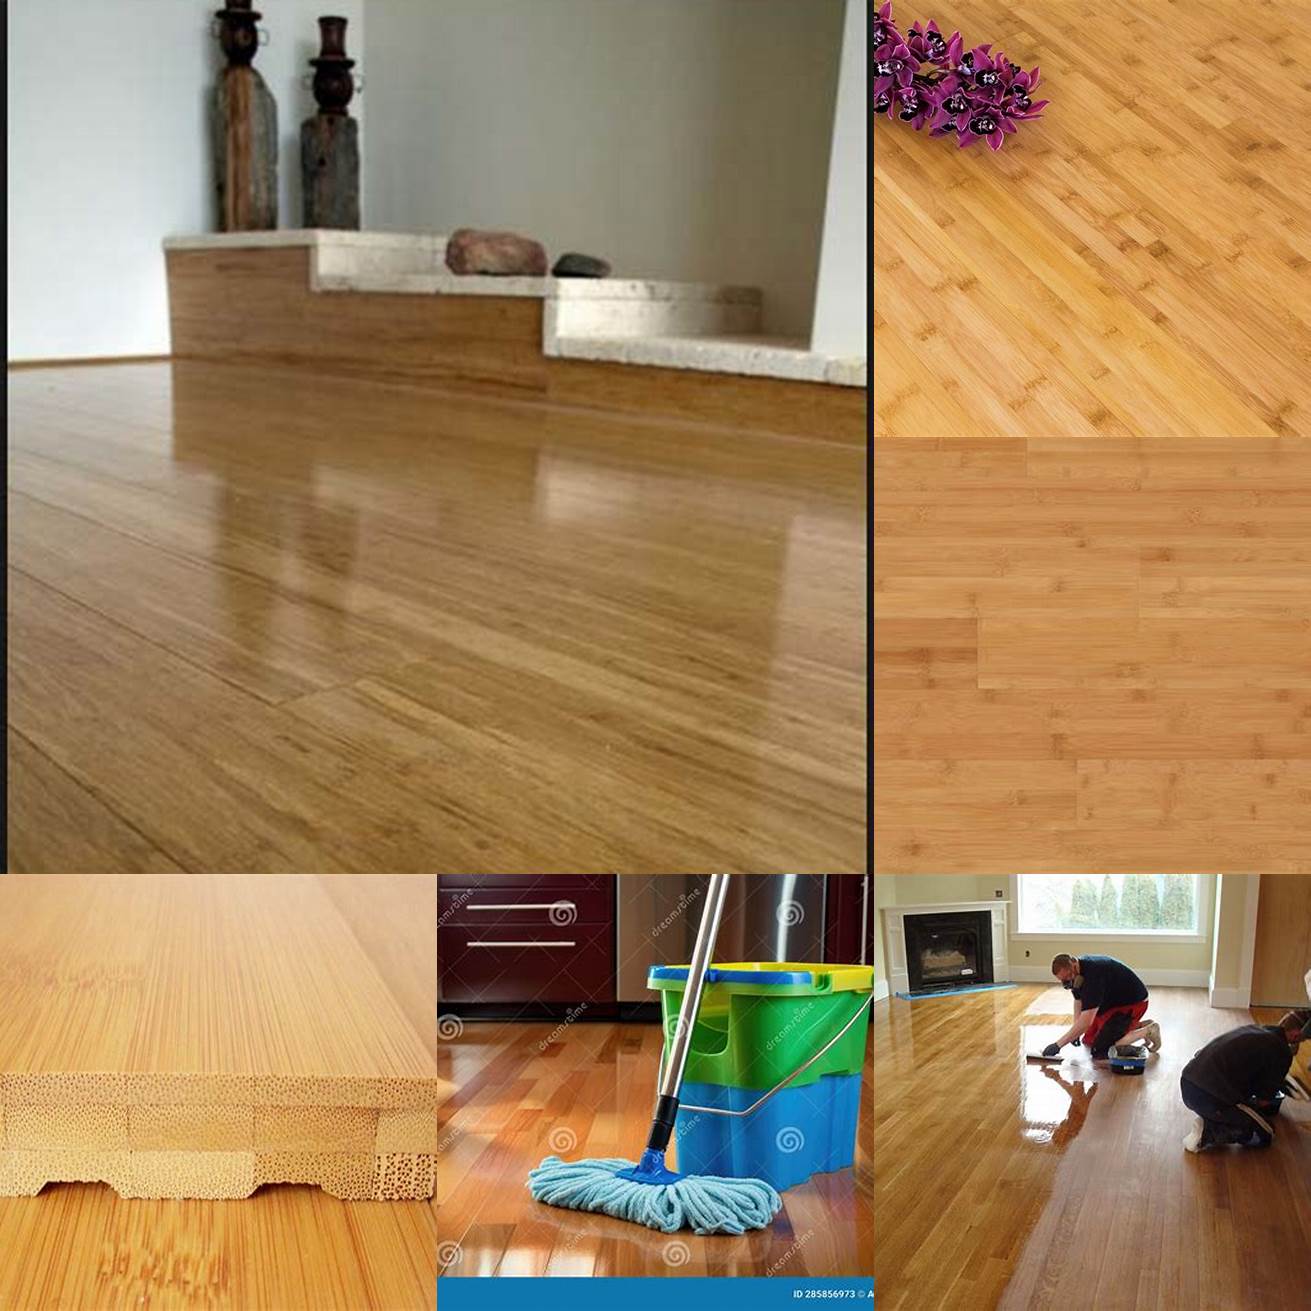 Apply a protective coating to bamboo furniture and flooring